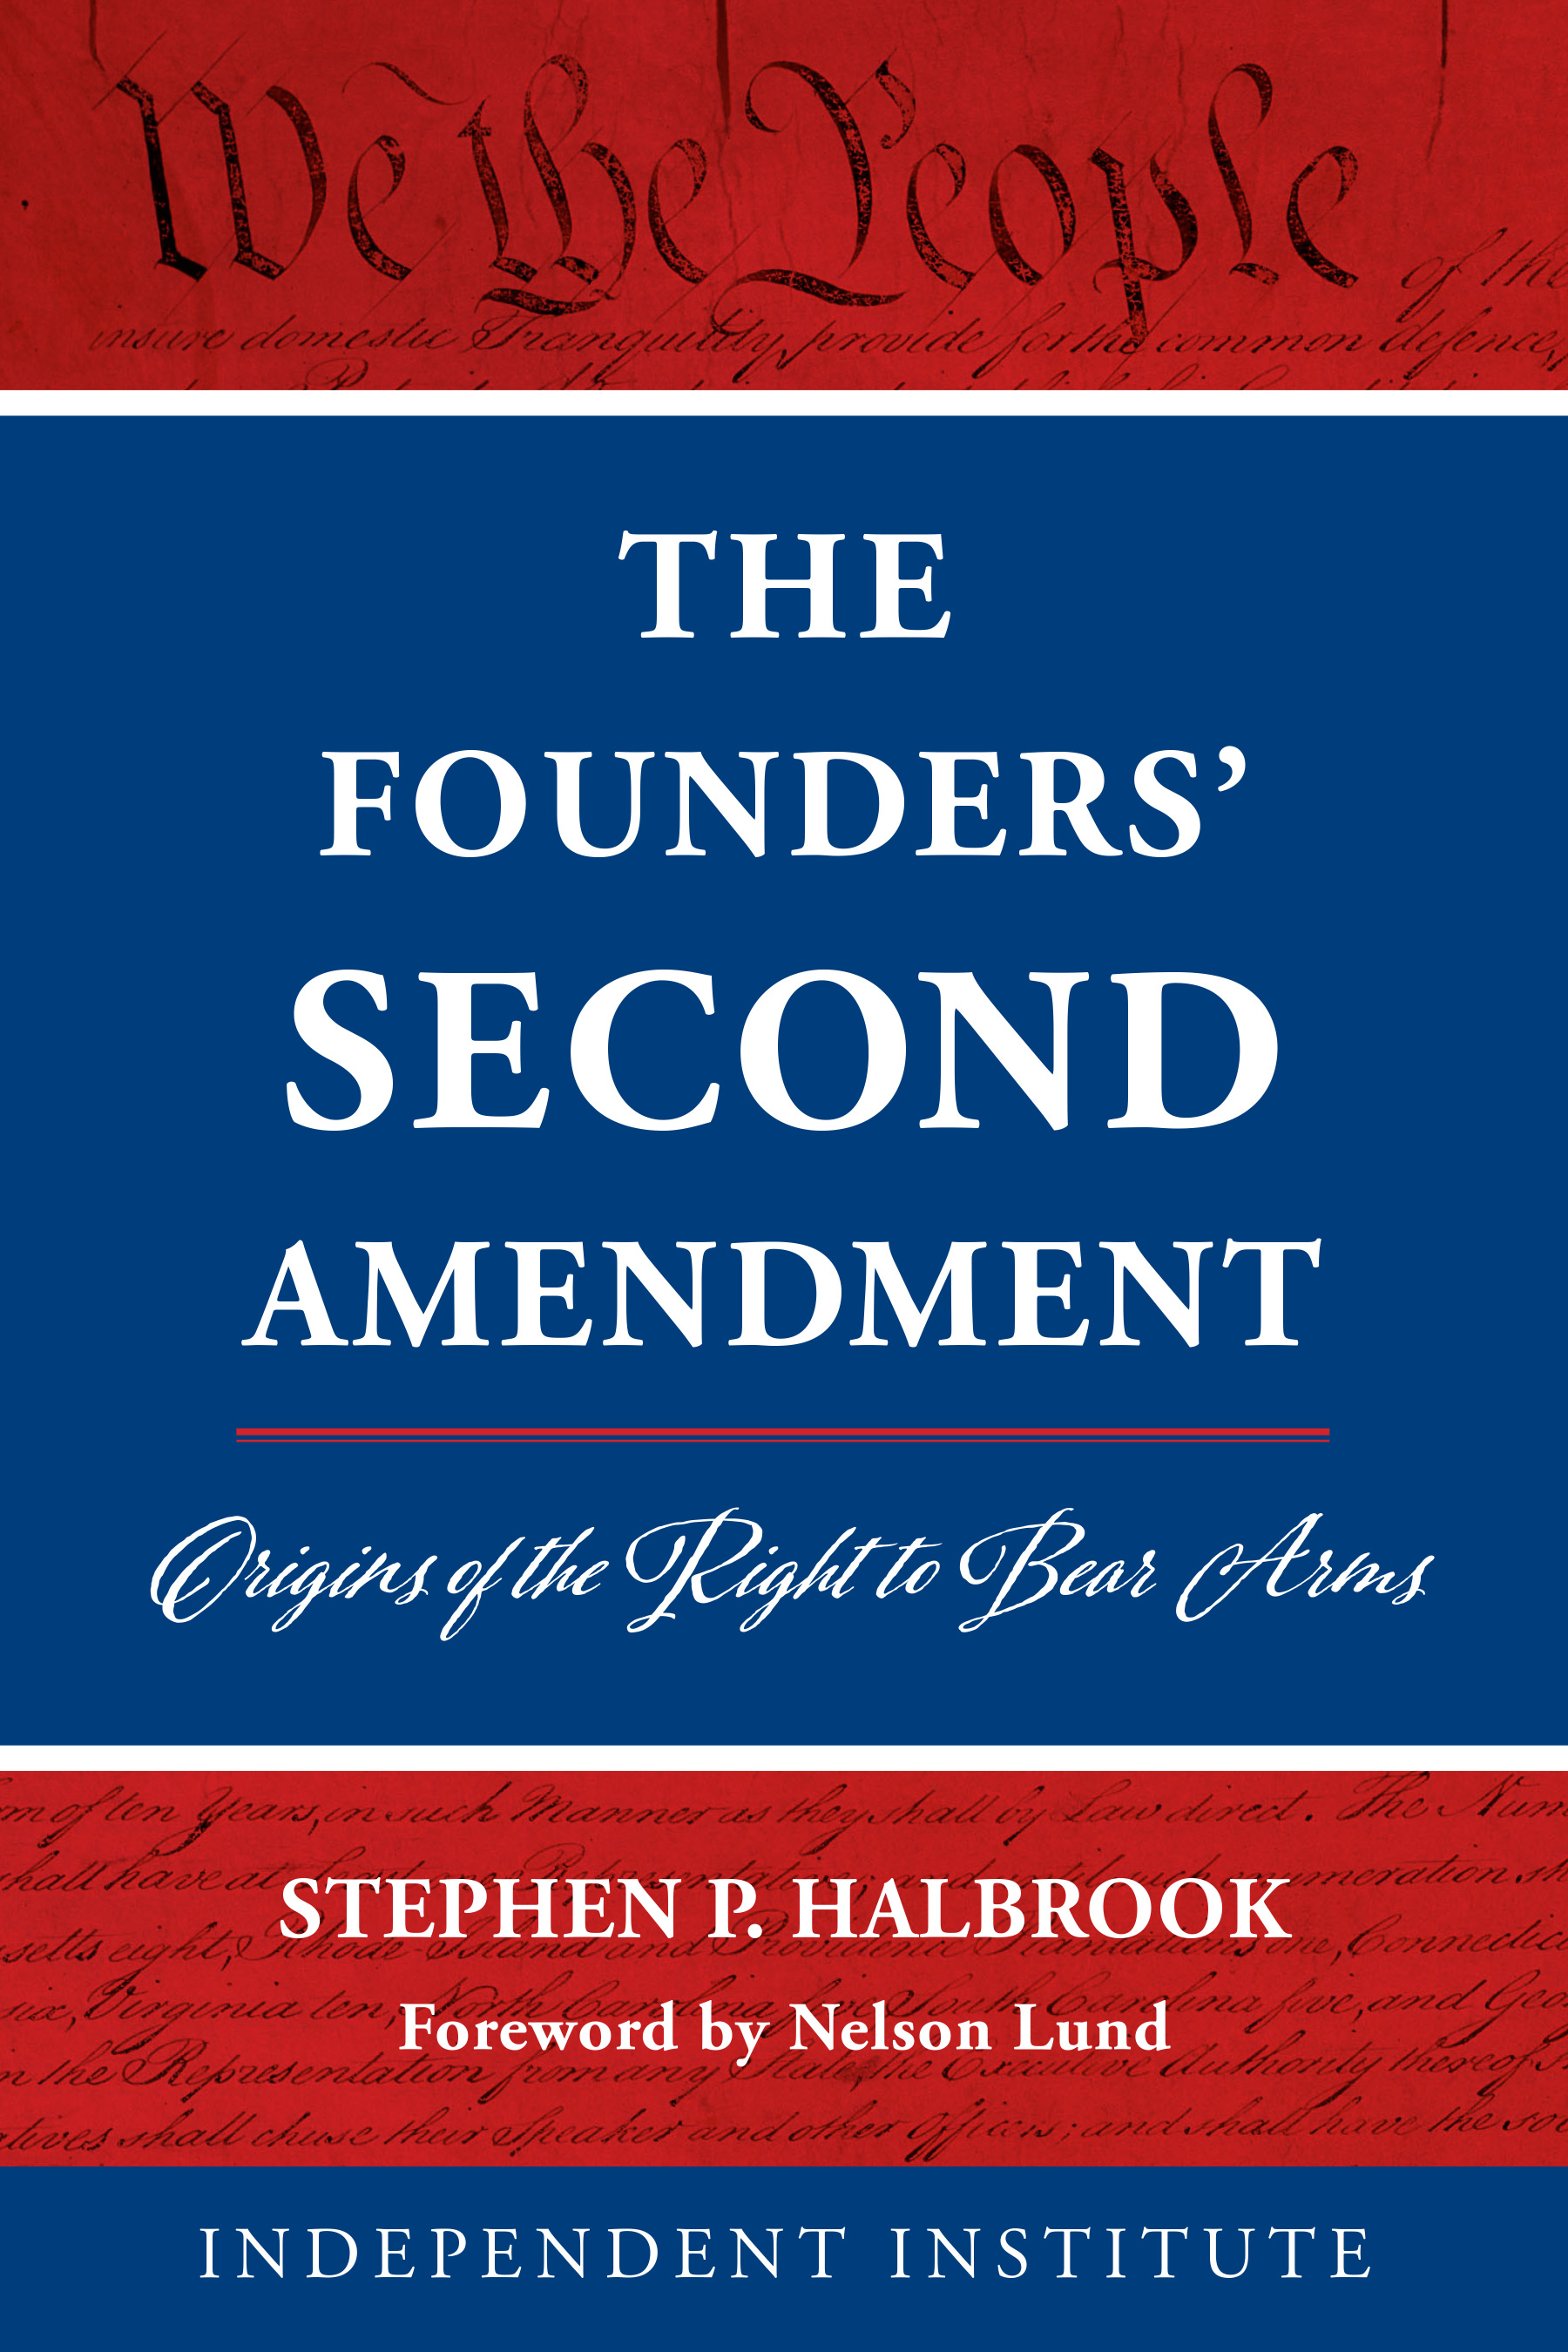 The Founders' Second Amendment (2019): Origins of the Right to Bear Arms